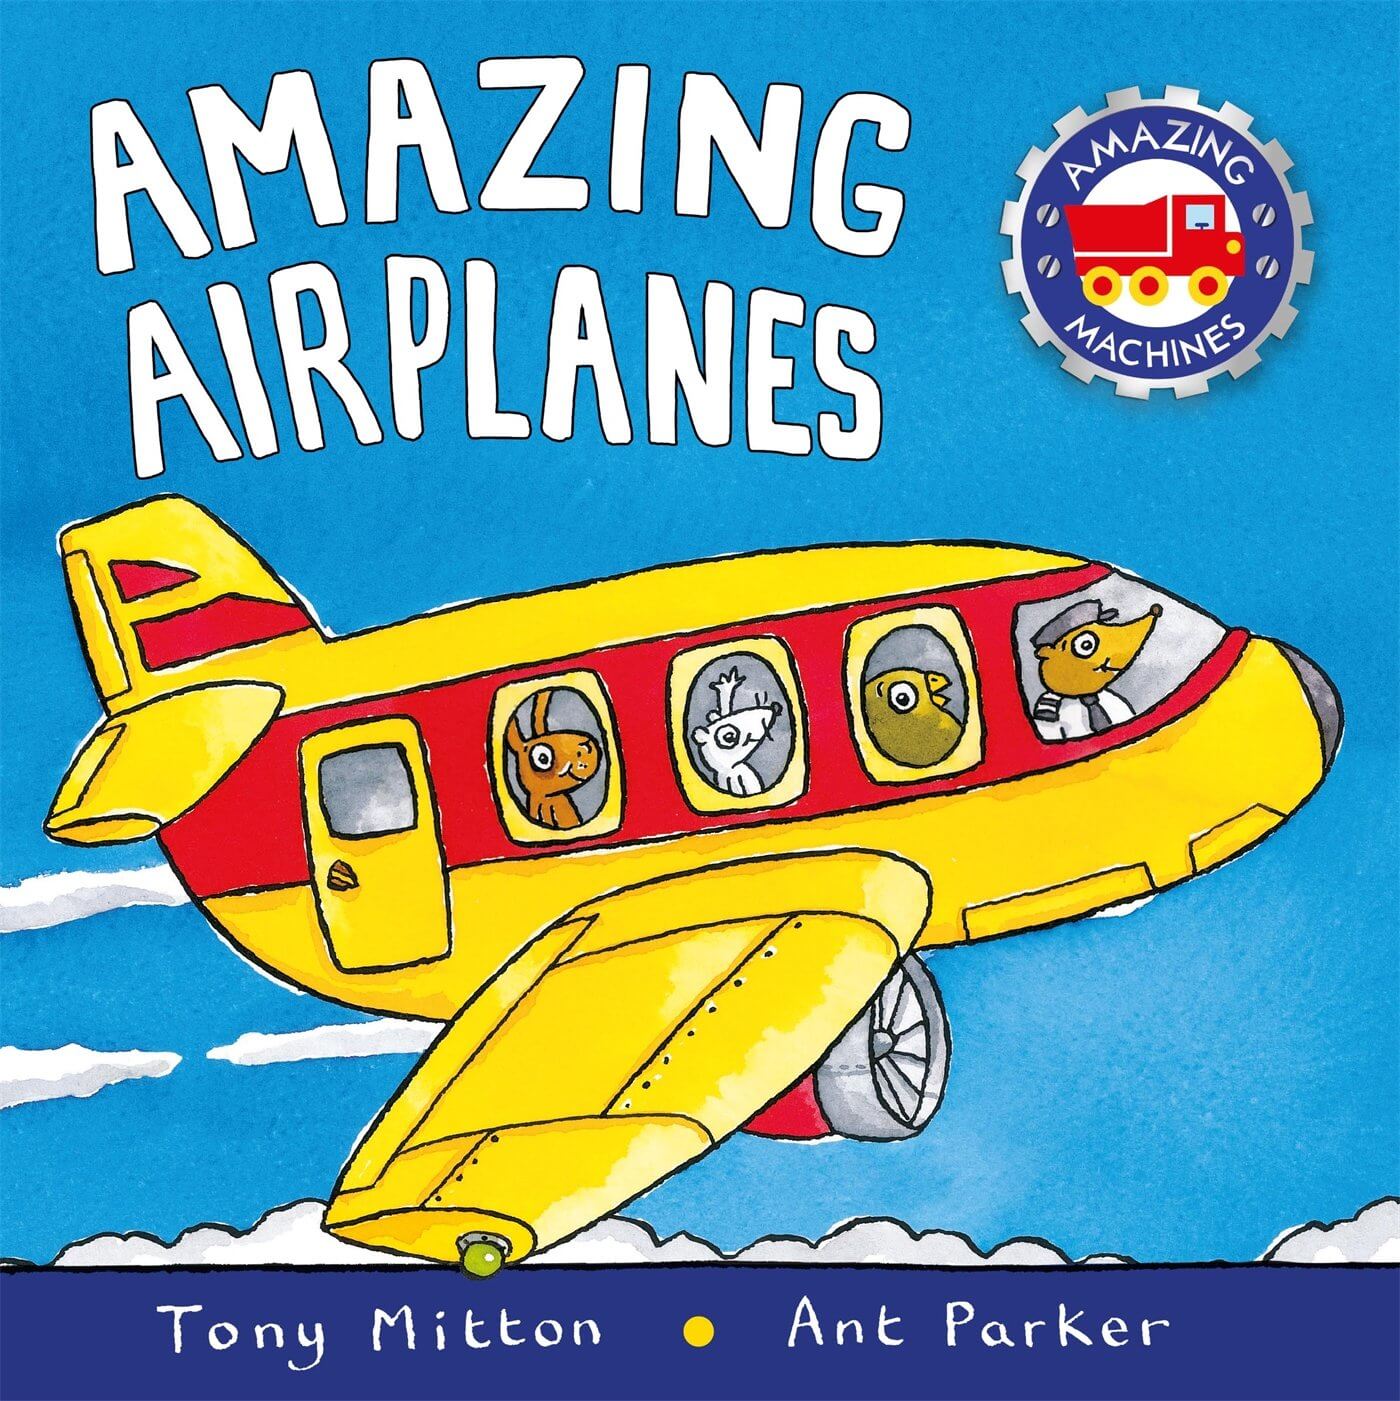 Best Books for Kids Who Love Travel